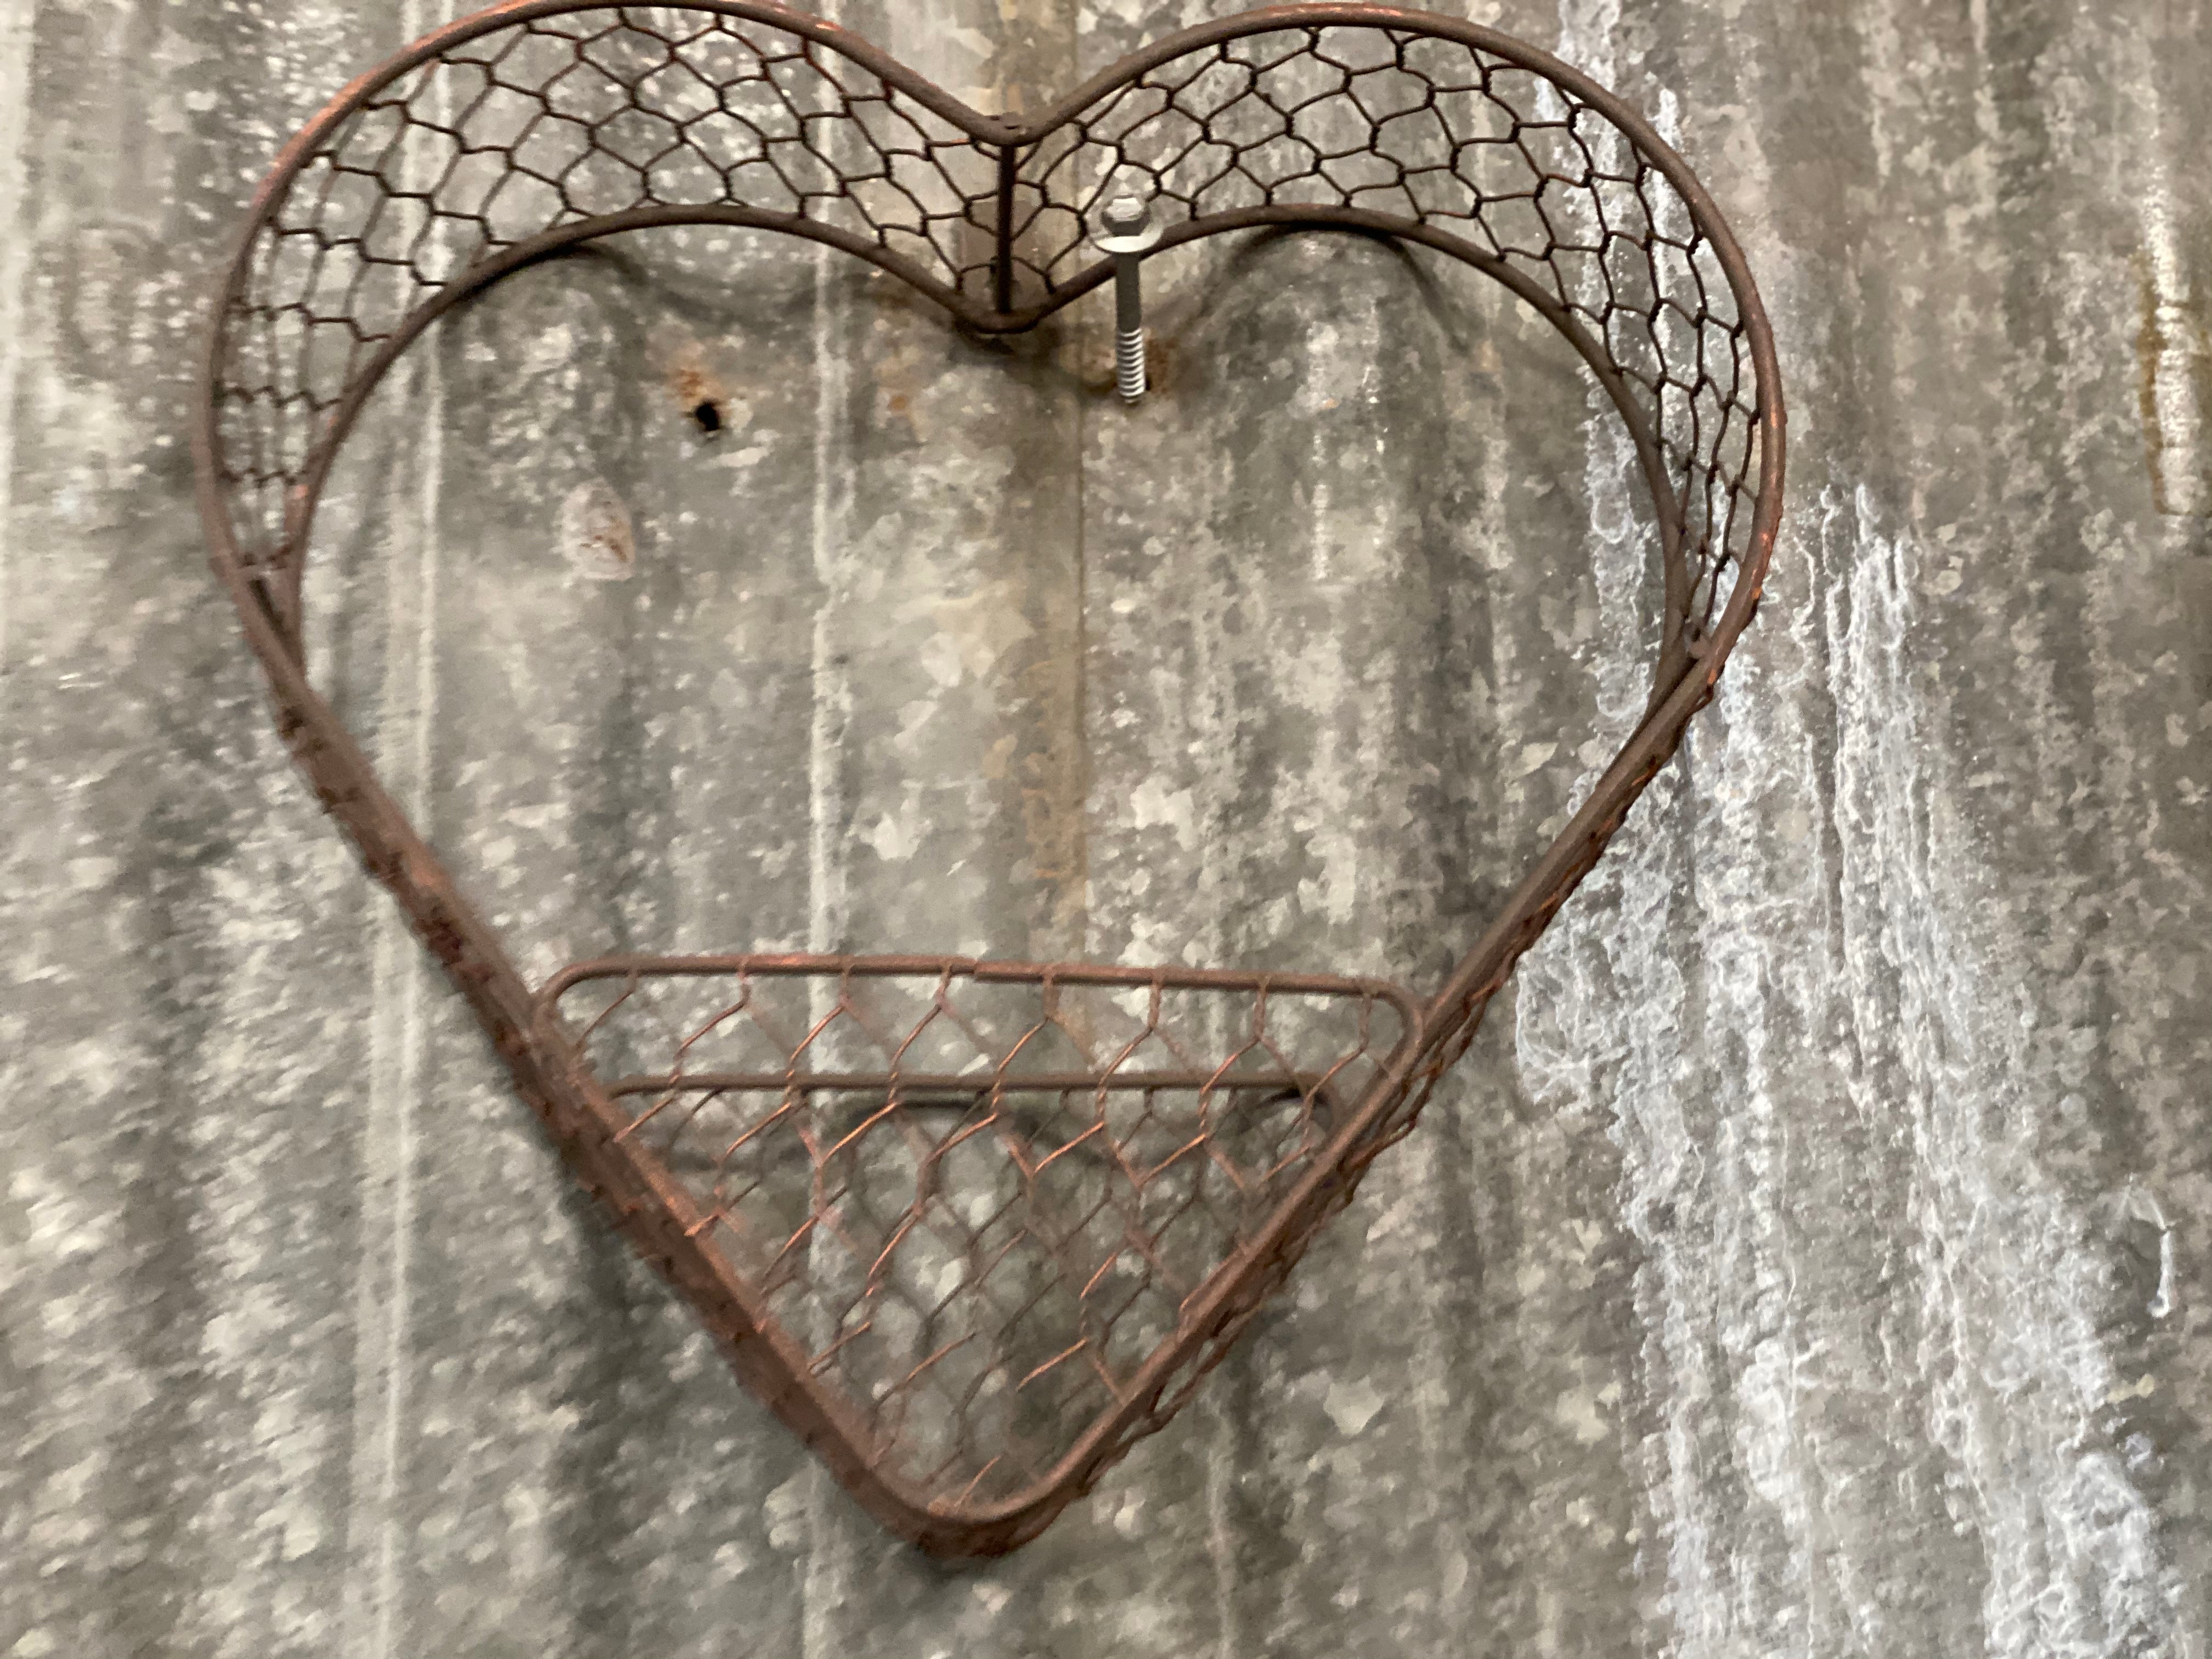 Wire Heart Wall Display Basket